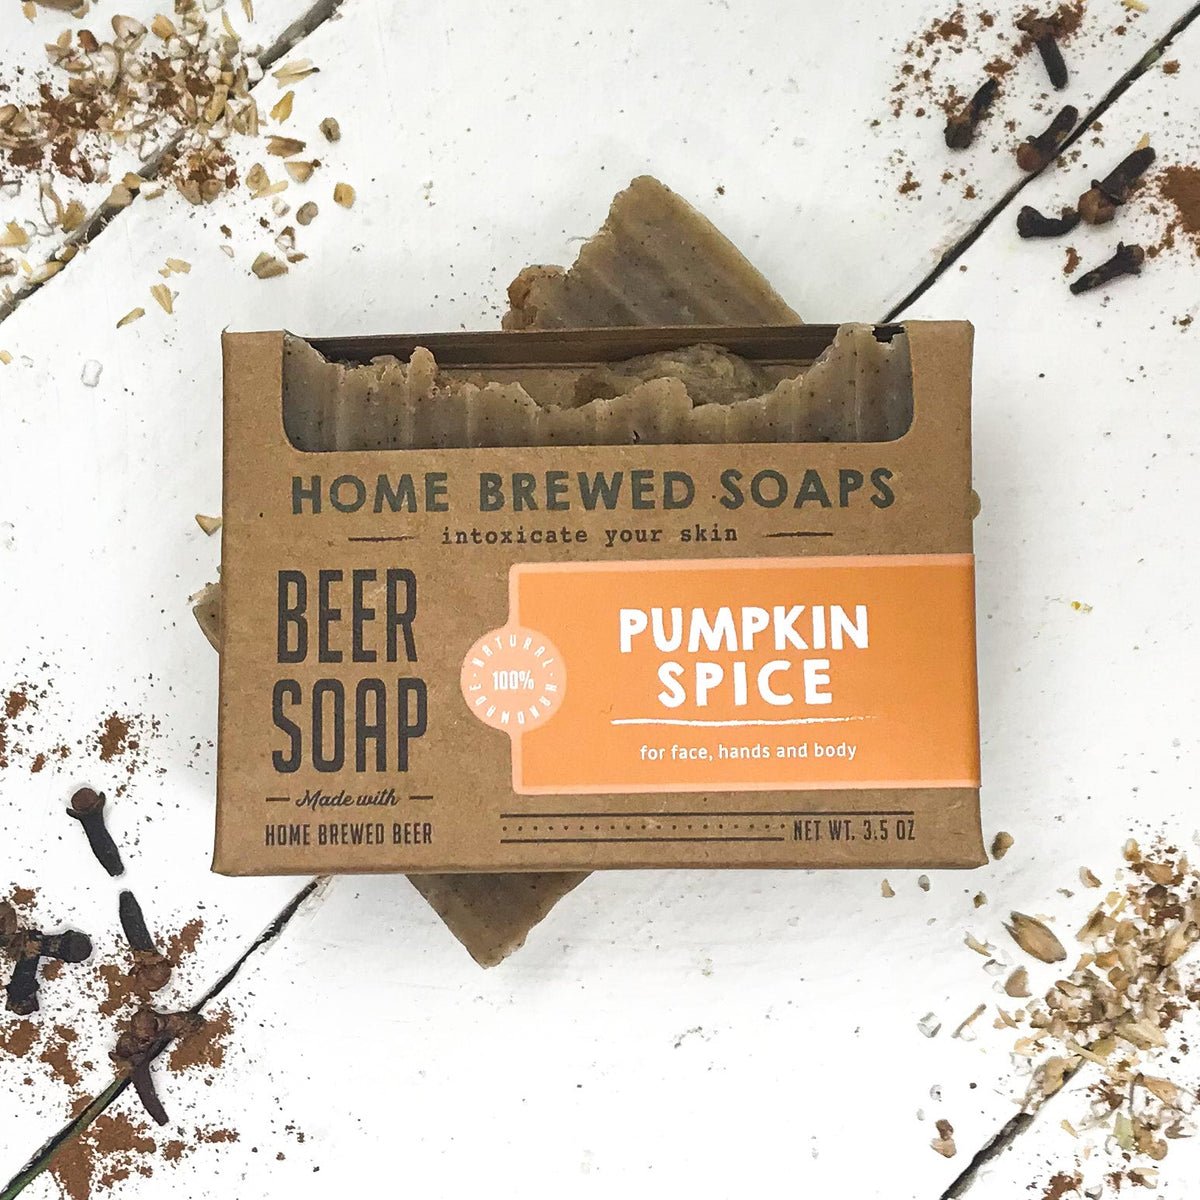 Beer Soap - Pumpkin Spice - Natural Soap for Beer Lovers by Home Brewed Soaps